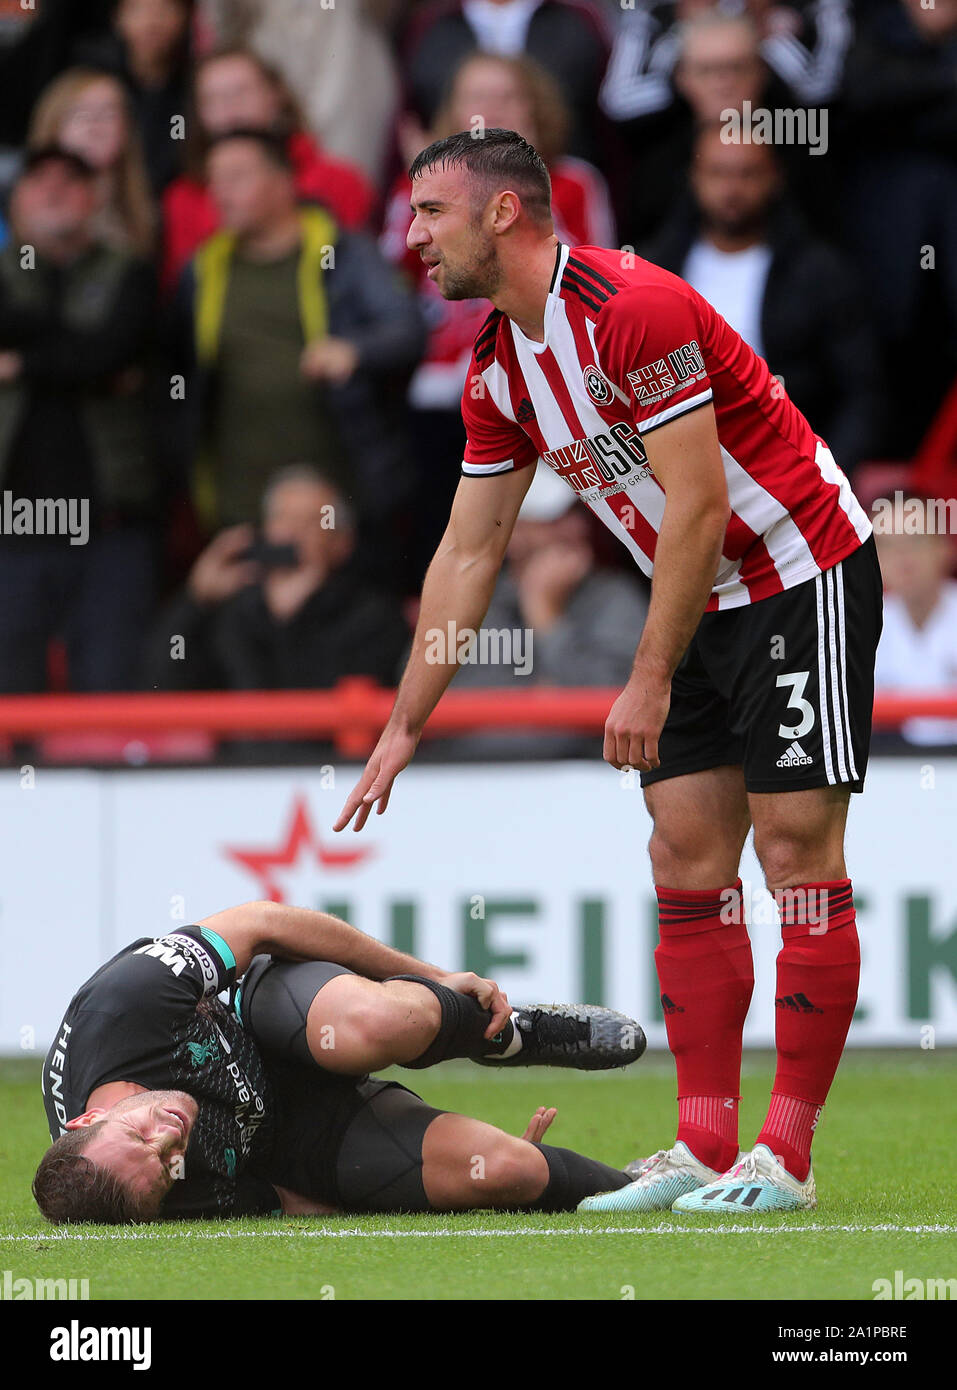 Vedholdende Søg Ni Liverpool's Jordan Henderson reacts to an injury as Sheffield United's Enda  Stevens looks on during the Premier League match at Bramall Lane, Sheffield  Stock Photo - Alamy